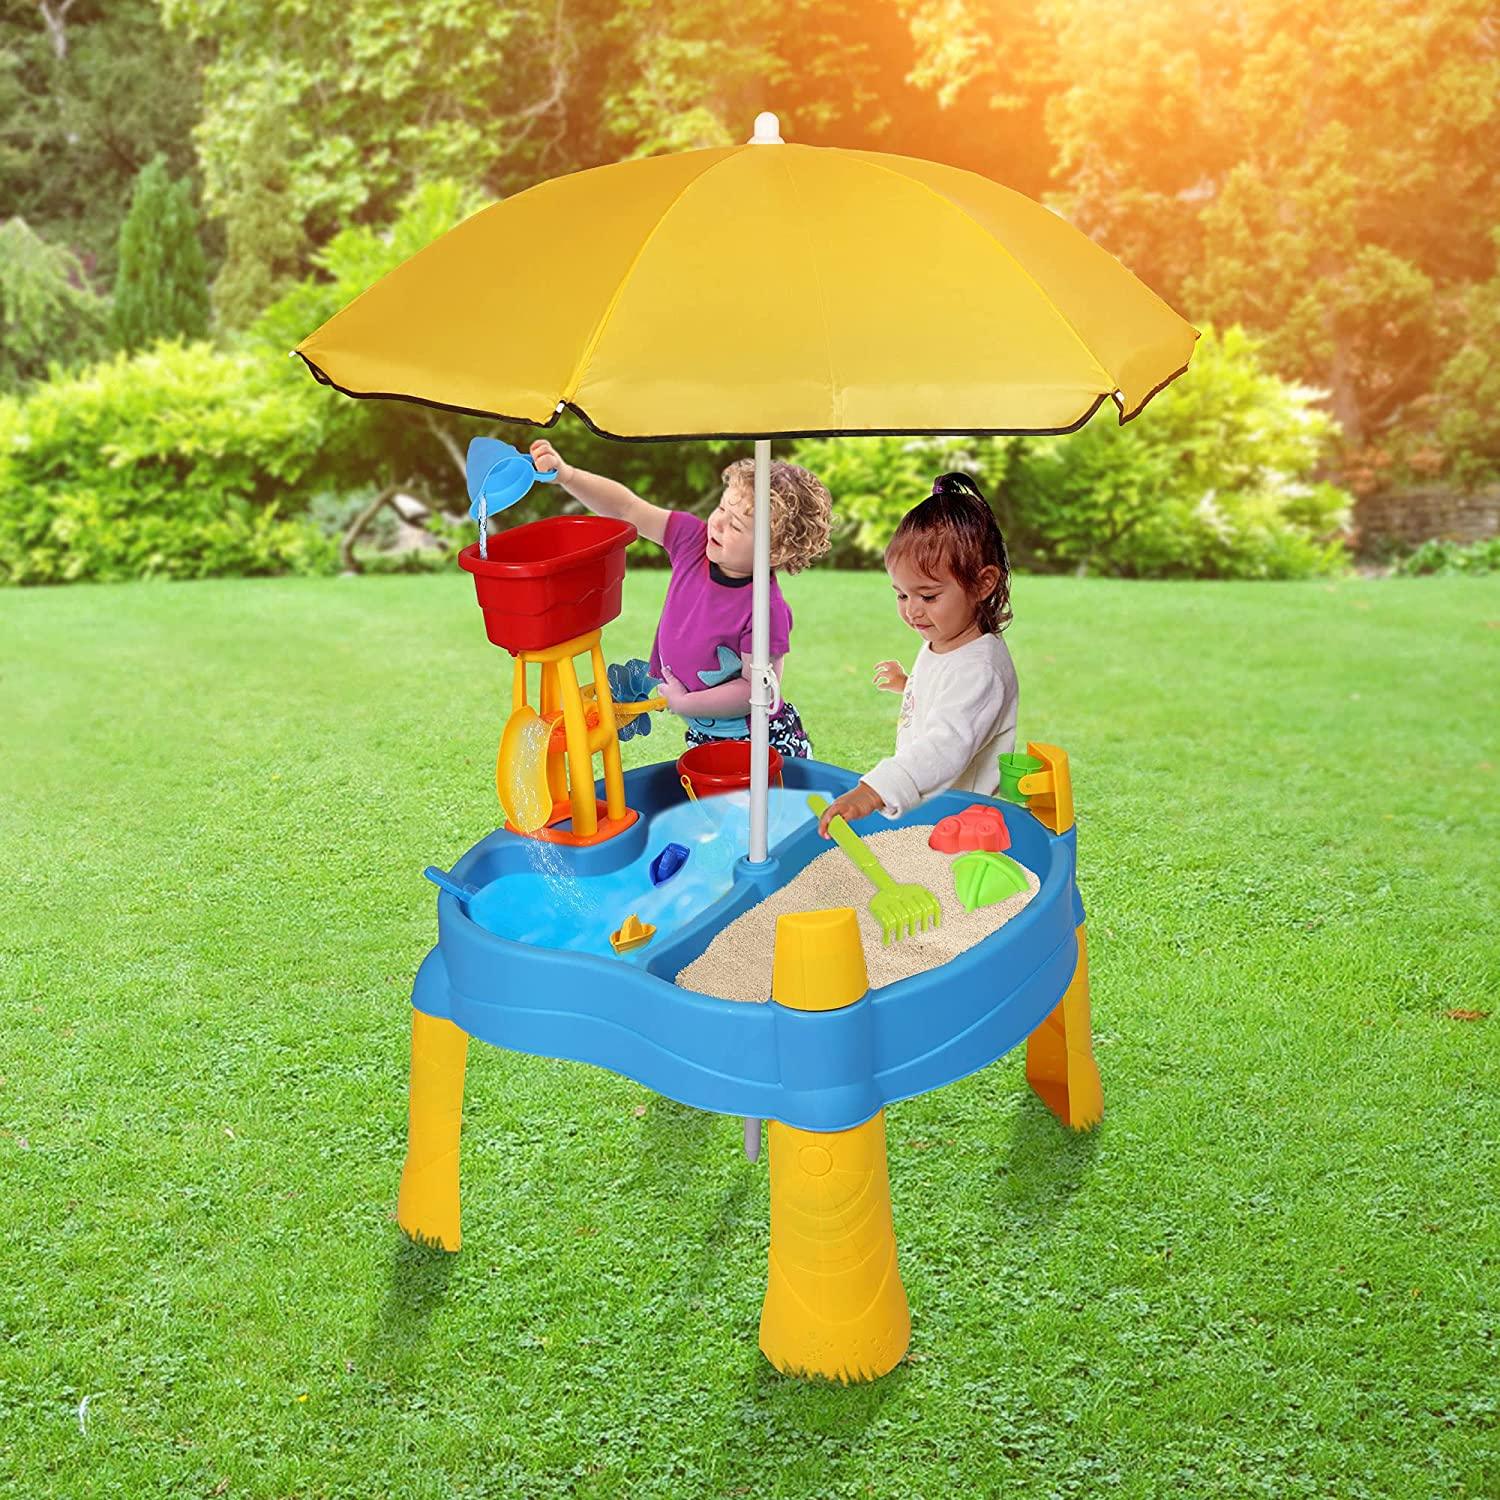 Kids Play Sand and Water Activity Table for Toddlers with Umbrella, Summer Beach Activity Toy Set for Outdoor - Bosonshop